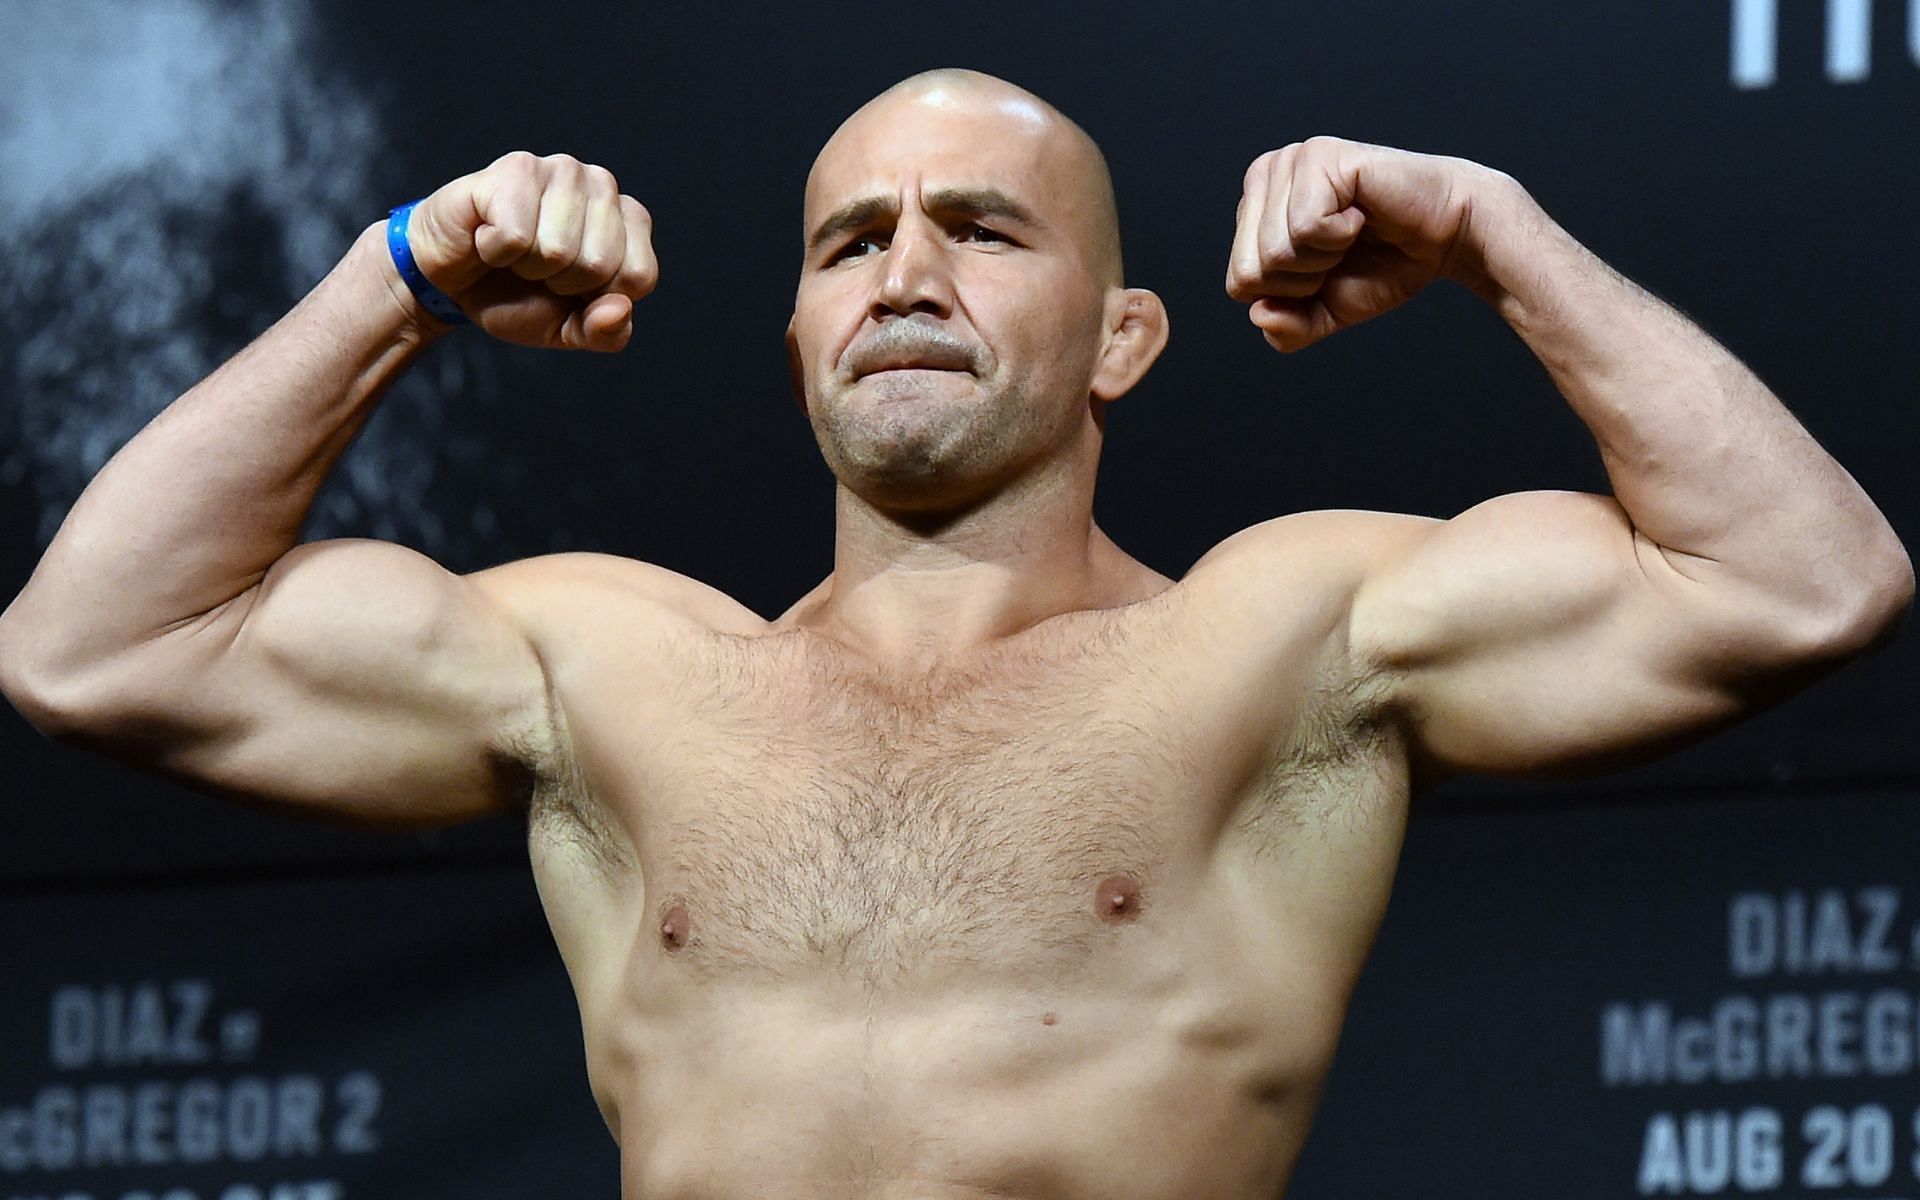 Glover Teixeira has competed in the sport of MMA since 2002